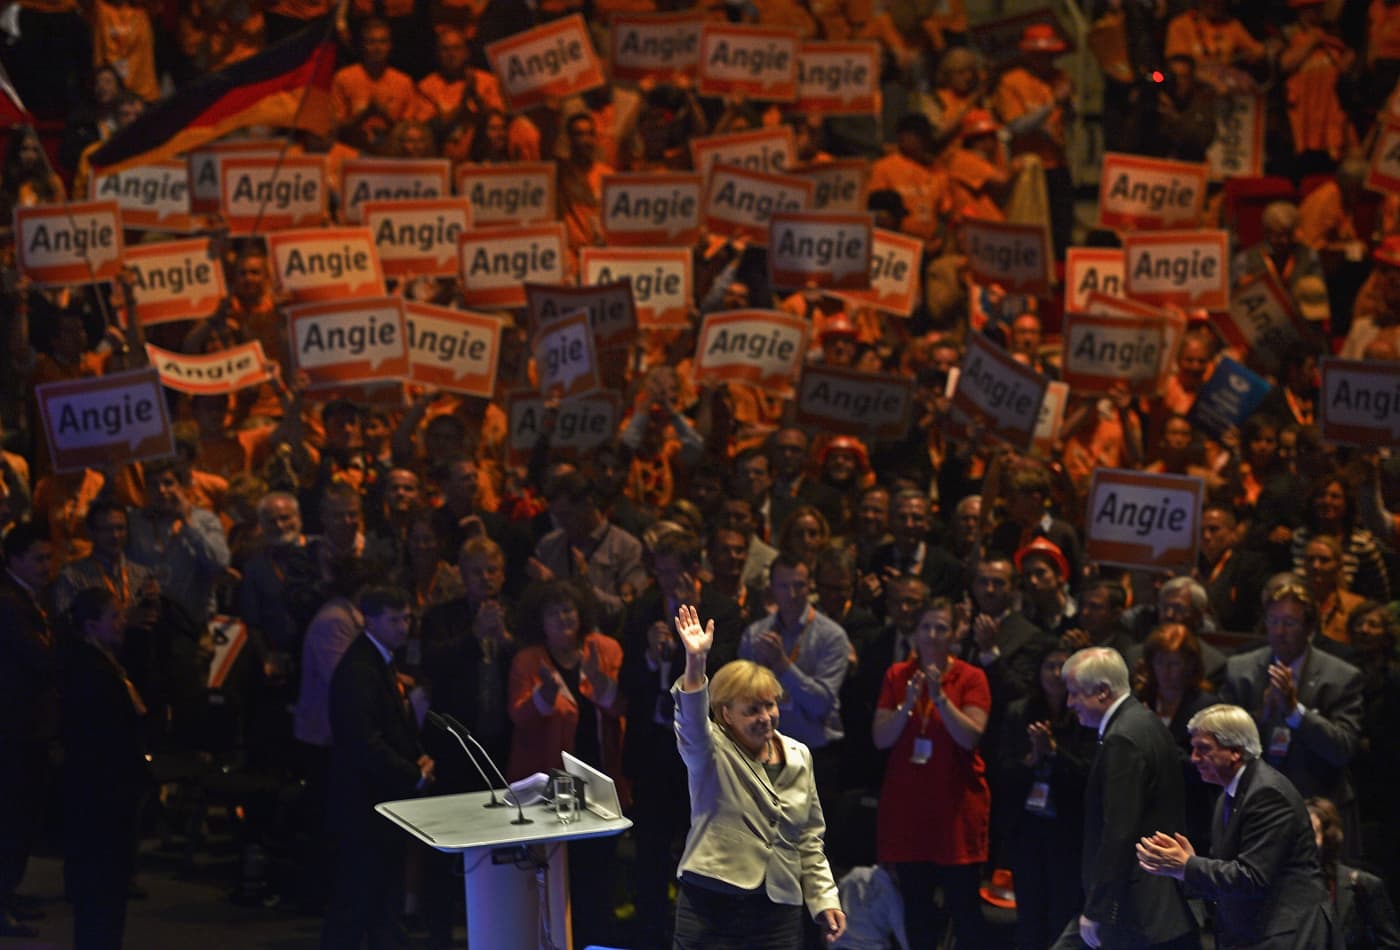 German Chancellor Angela Merkel waves at the first election campaign rally in the final phase of campaigning on September 8, 2013 - when Merkel and the CDU had a strong lead in polls over the opposition. 